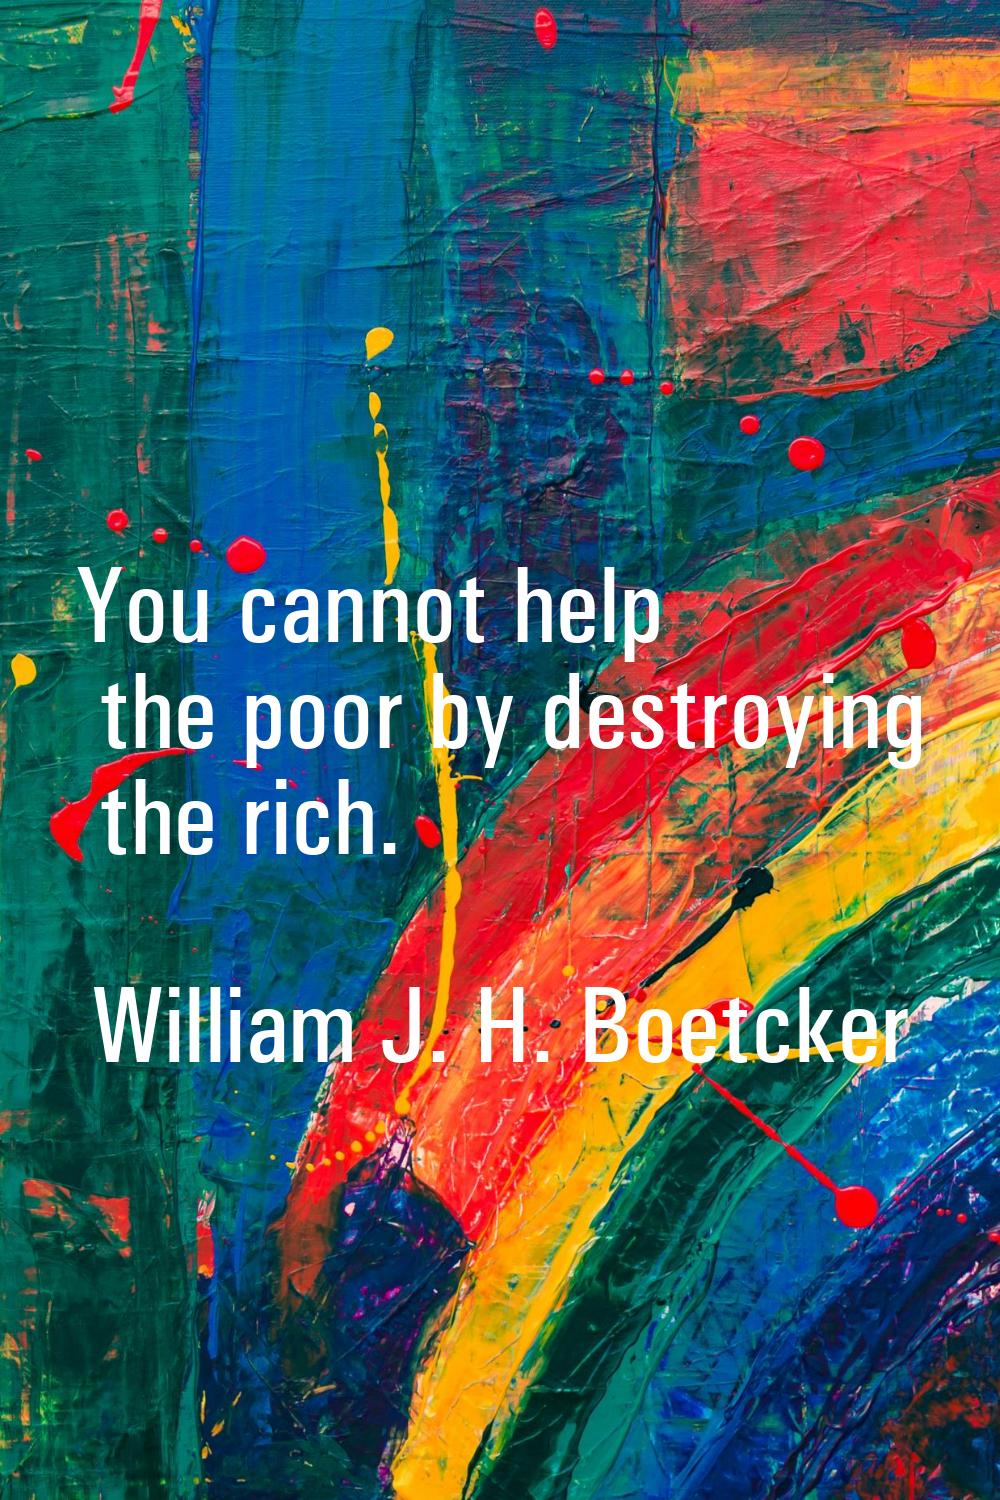 You cannot help the poor by destroying the rich.